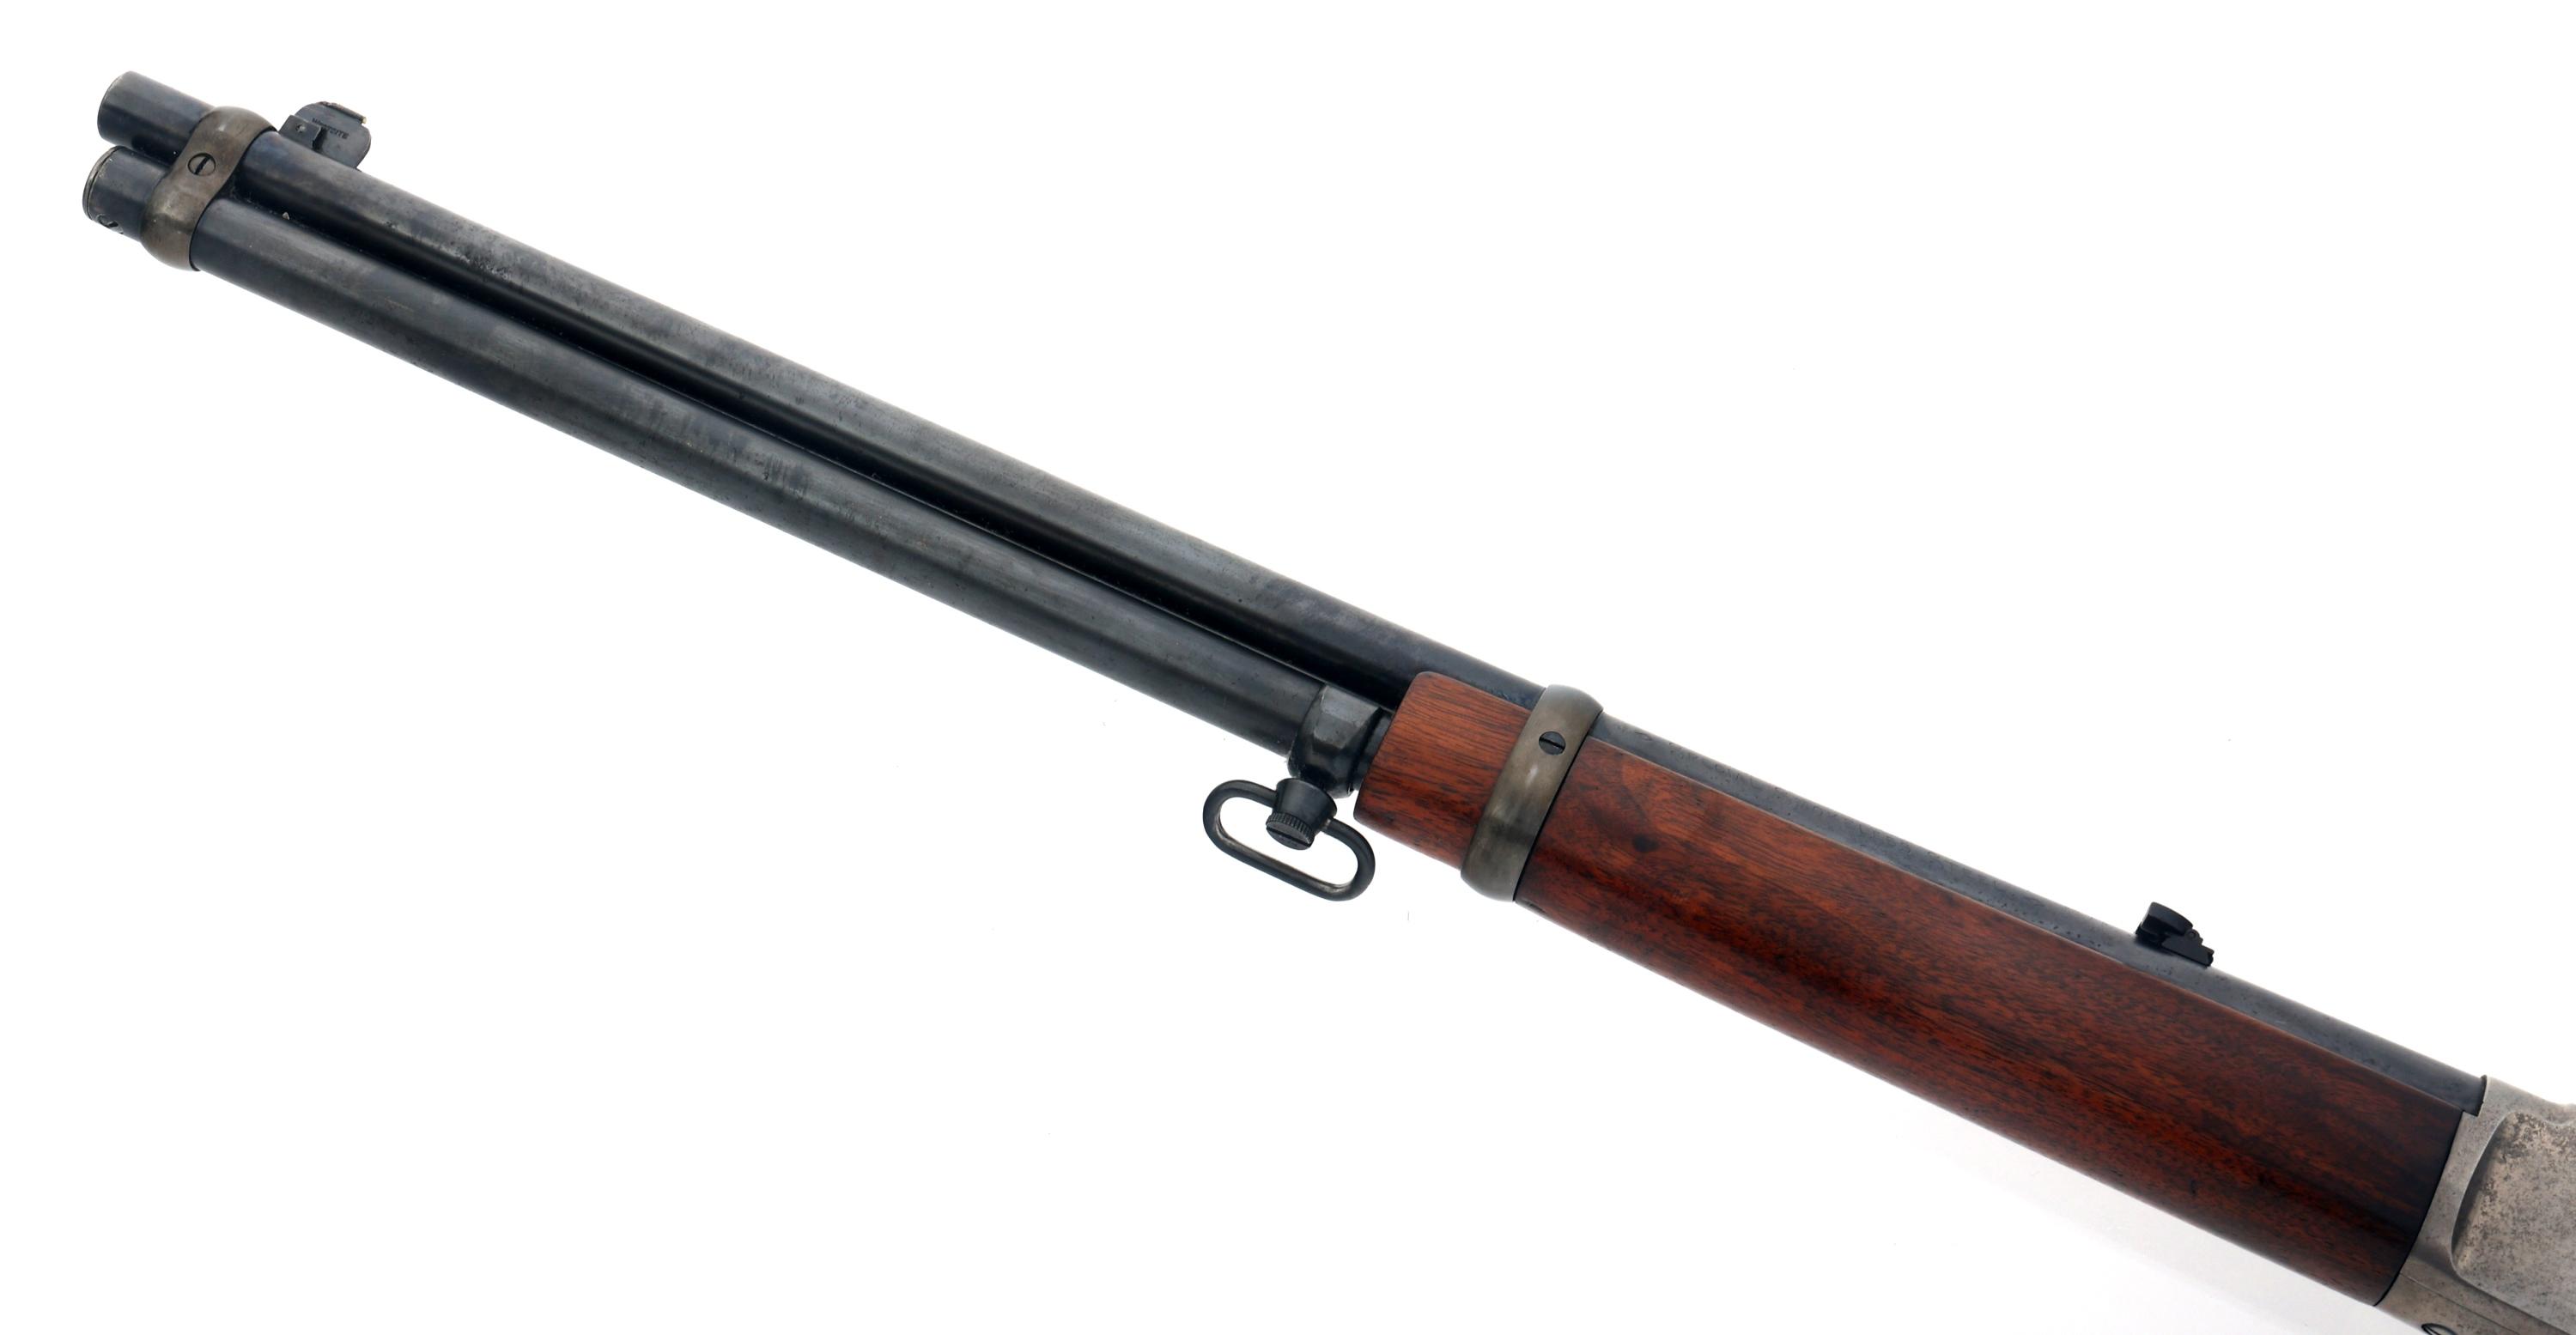 MARLIN MODEL 93 .30-30 CALIBER LEVER ACTION RIFLE